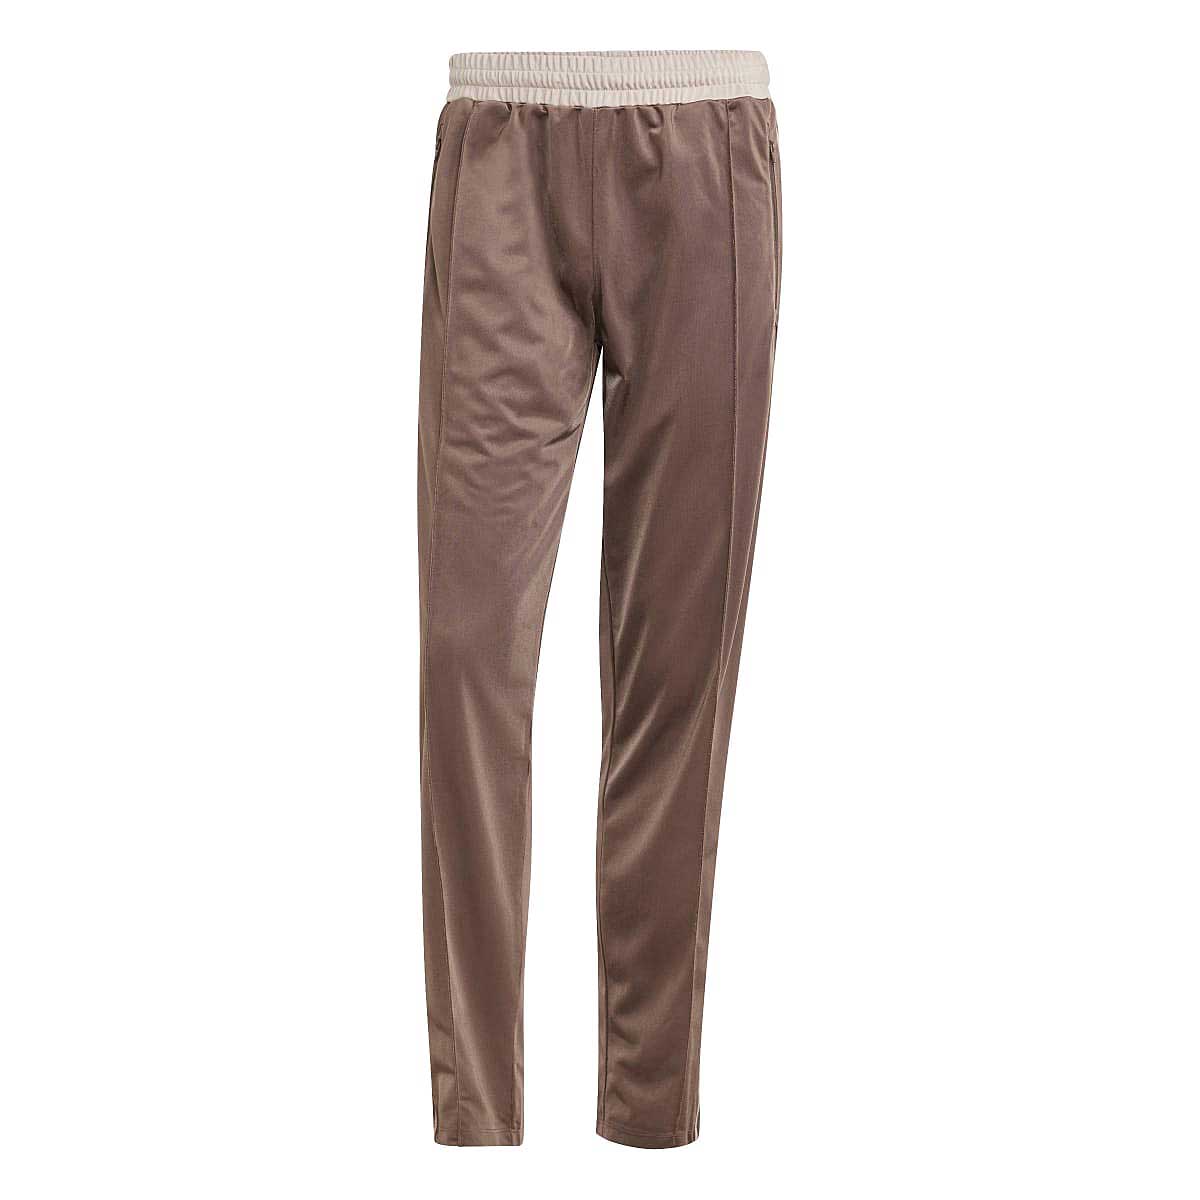 Image of Adidas Archive Trackpants, Brown/beige